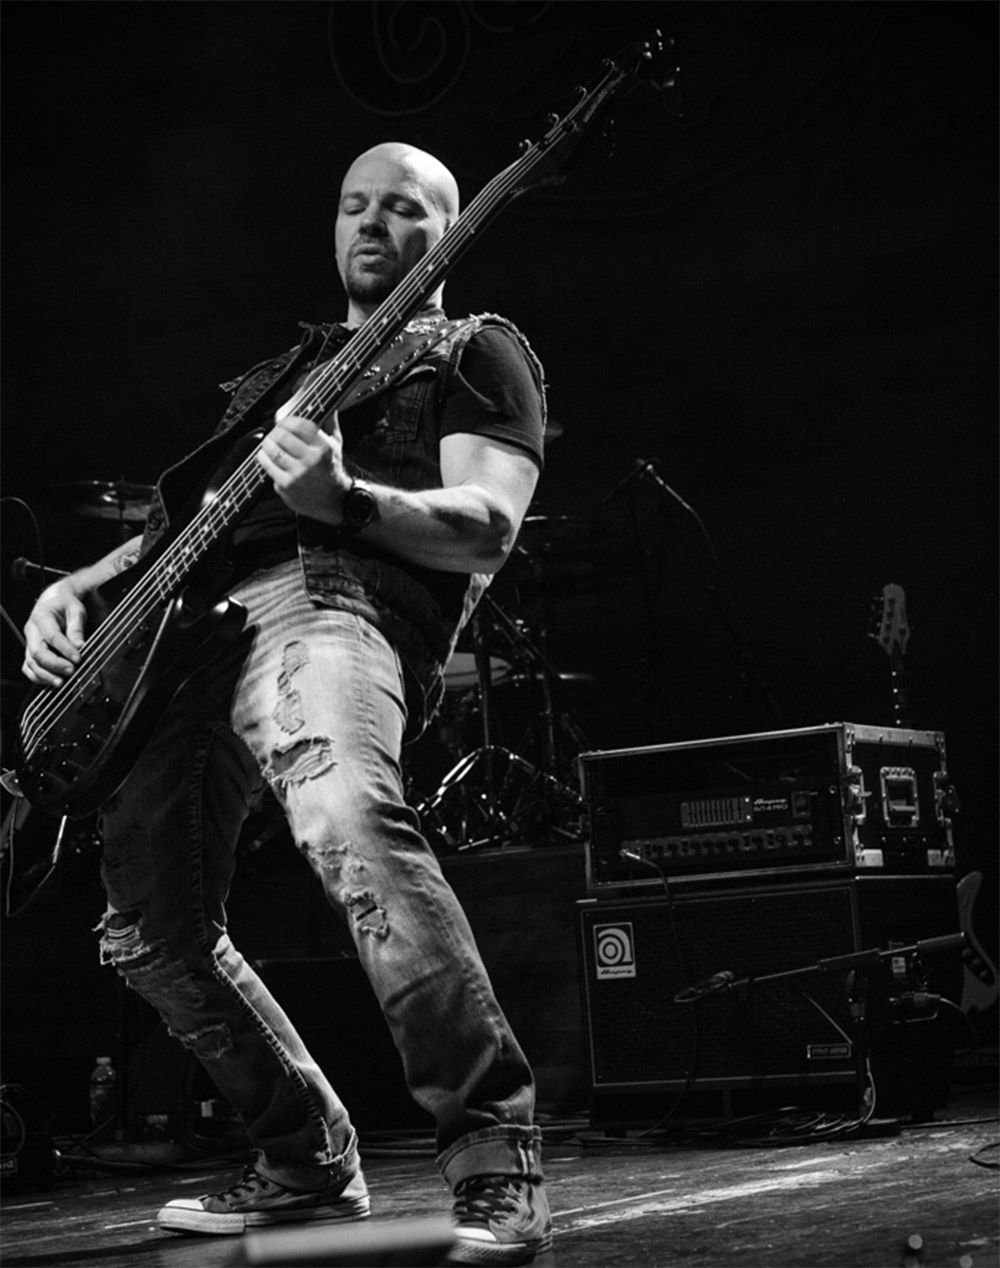 Tracy Goode playing bass on stage